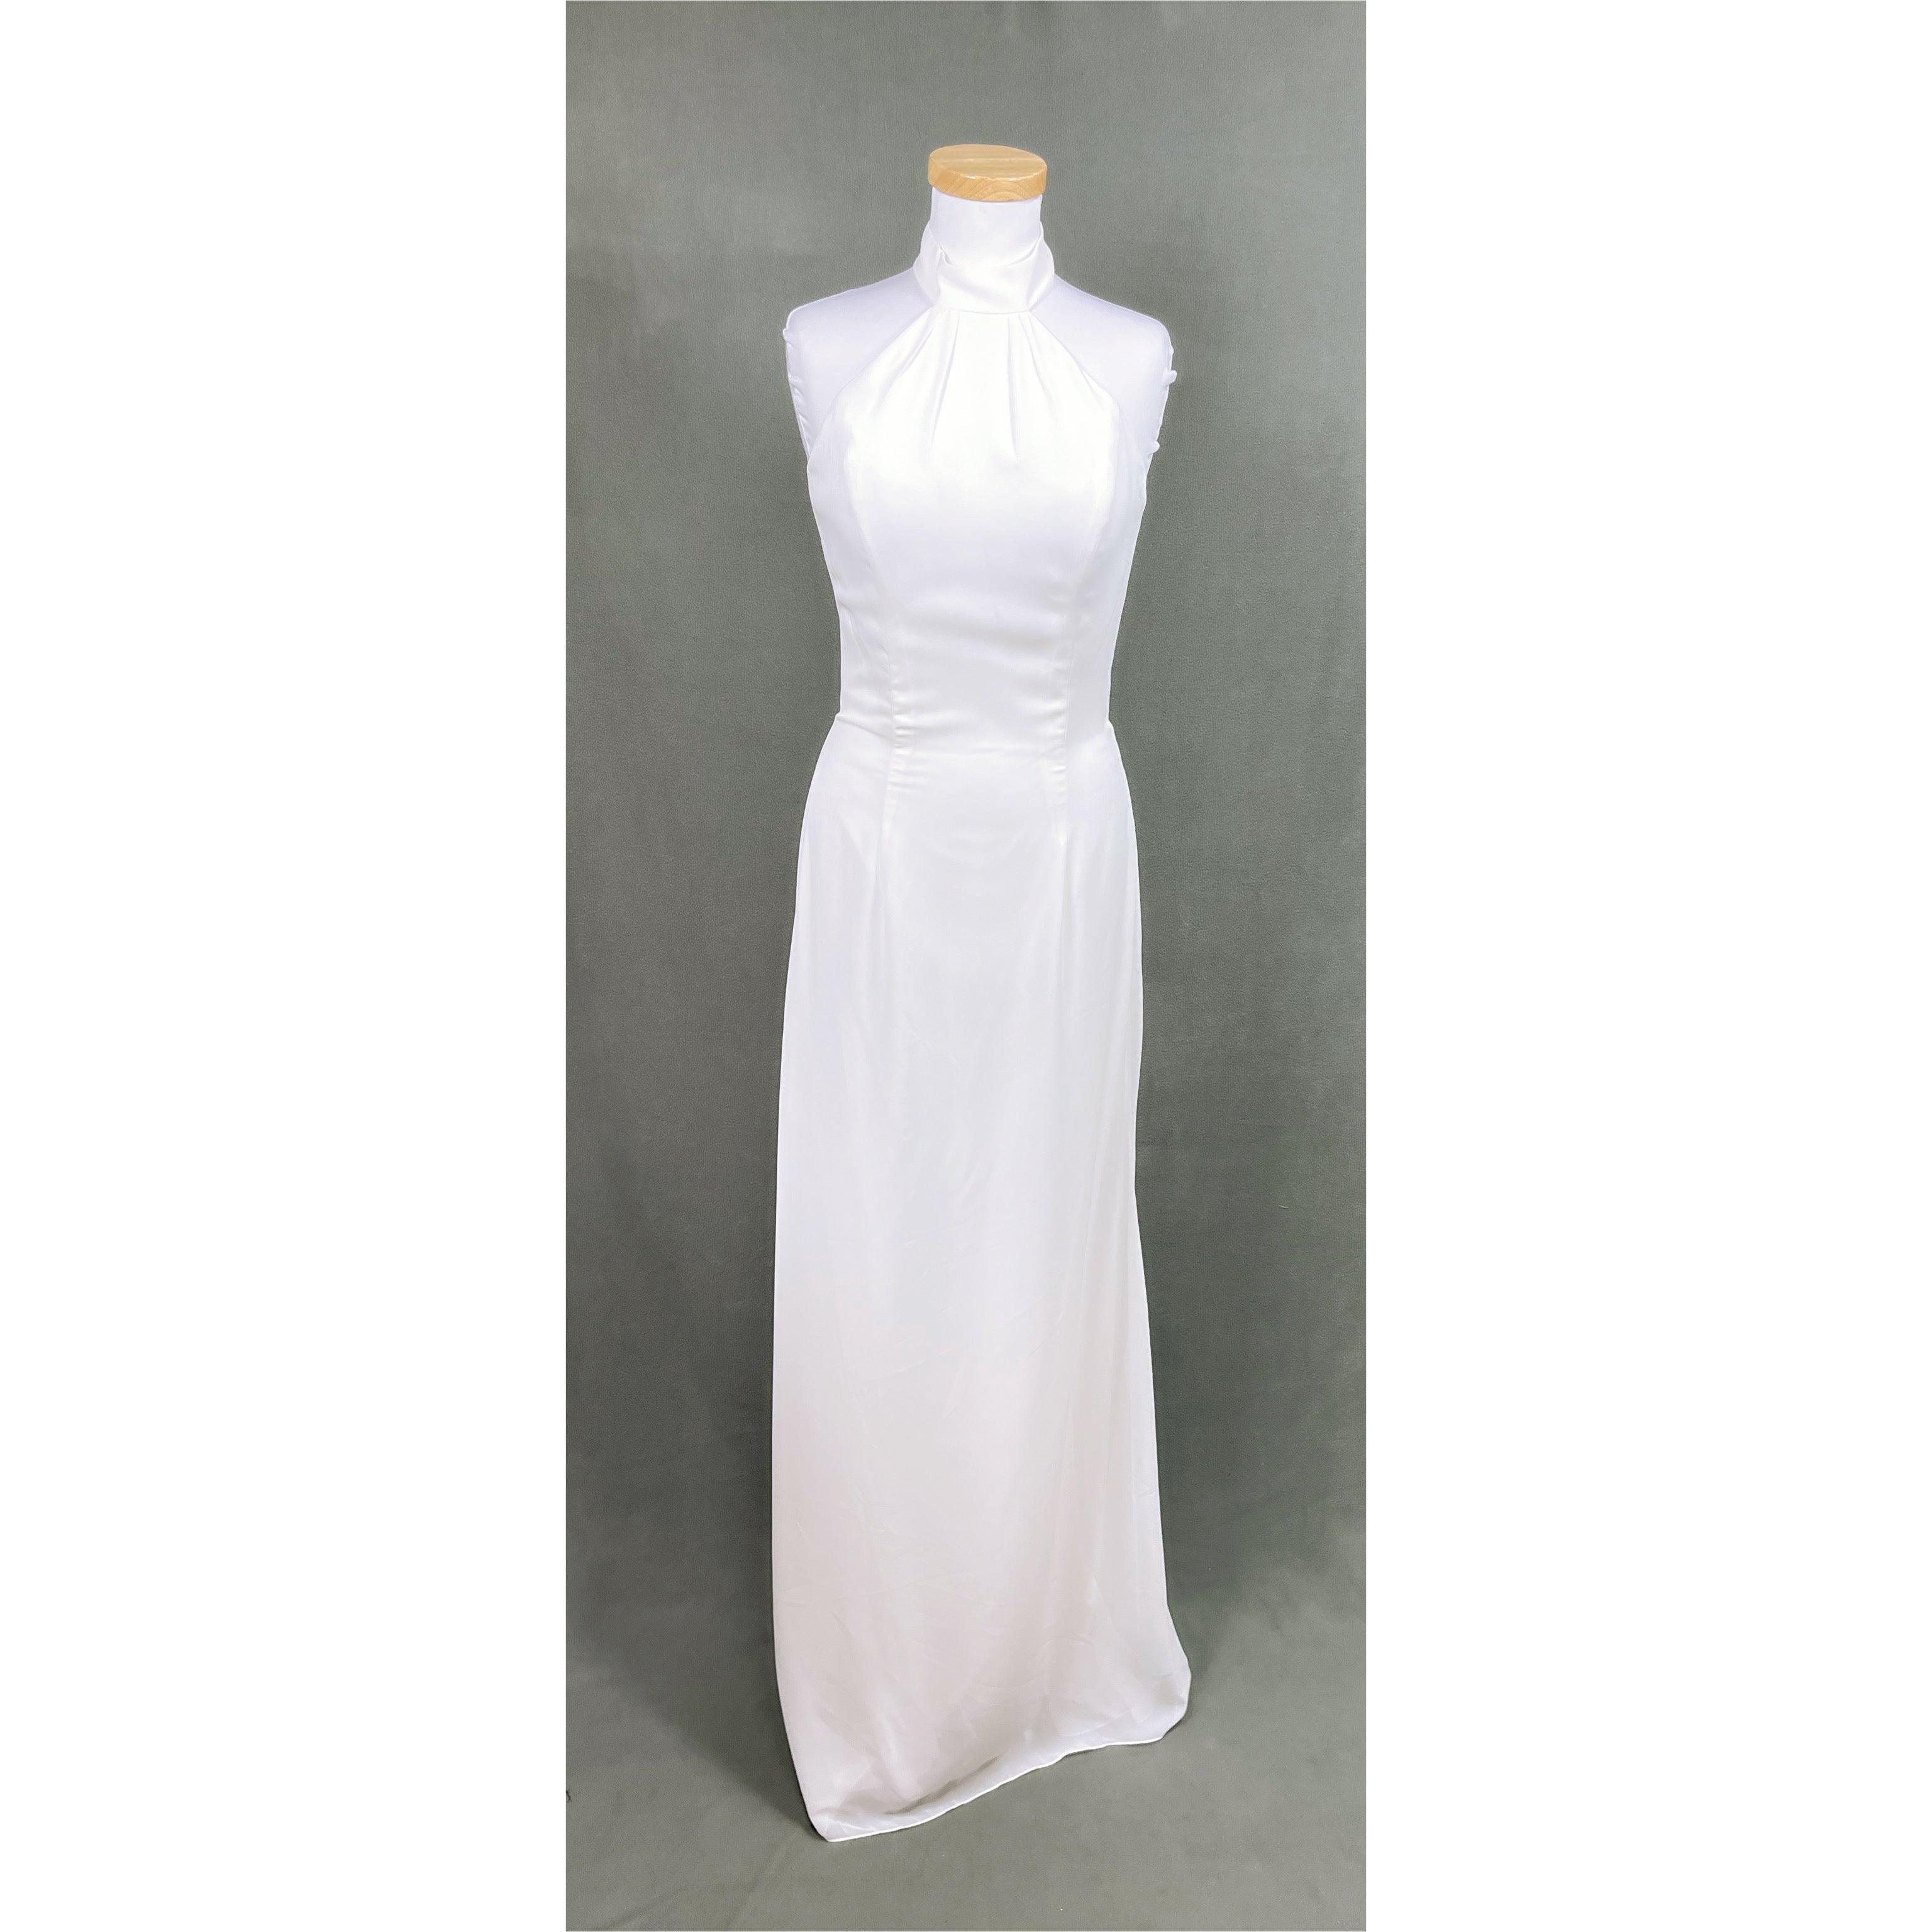 Jasmine Bridesmaids ivory dress, size 8, NEW WITH TAGS!